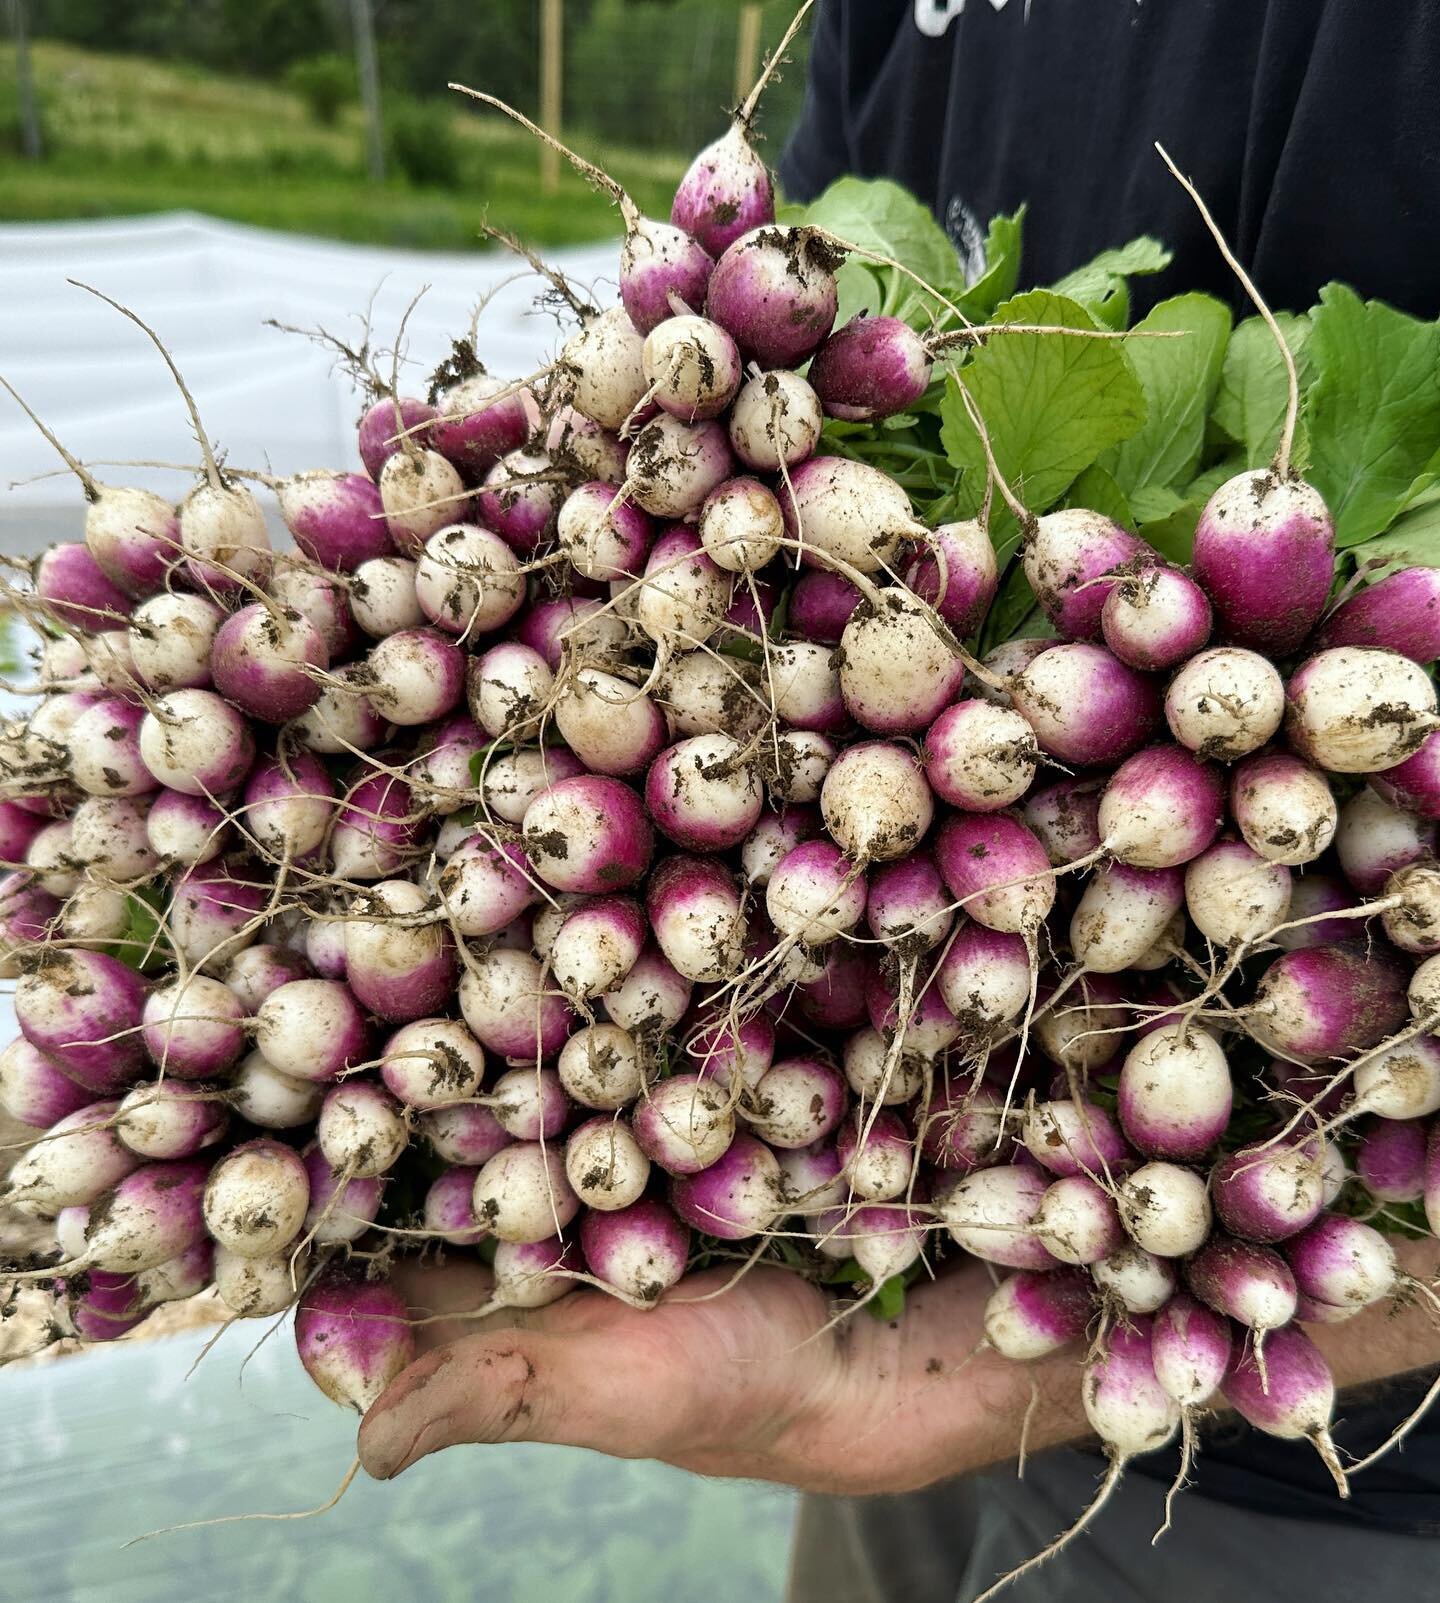 TOMORROW : we are back at the @litchfieldhillsfarmfreshmarket from 10-1 in the Center school parking lot. 
We will have first cuts of tender baby arugula, these gorgeous radishes, cut greens and bunches of Veronica, phlox and columbine. 
See you ther